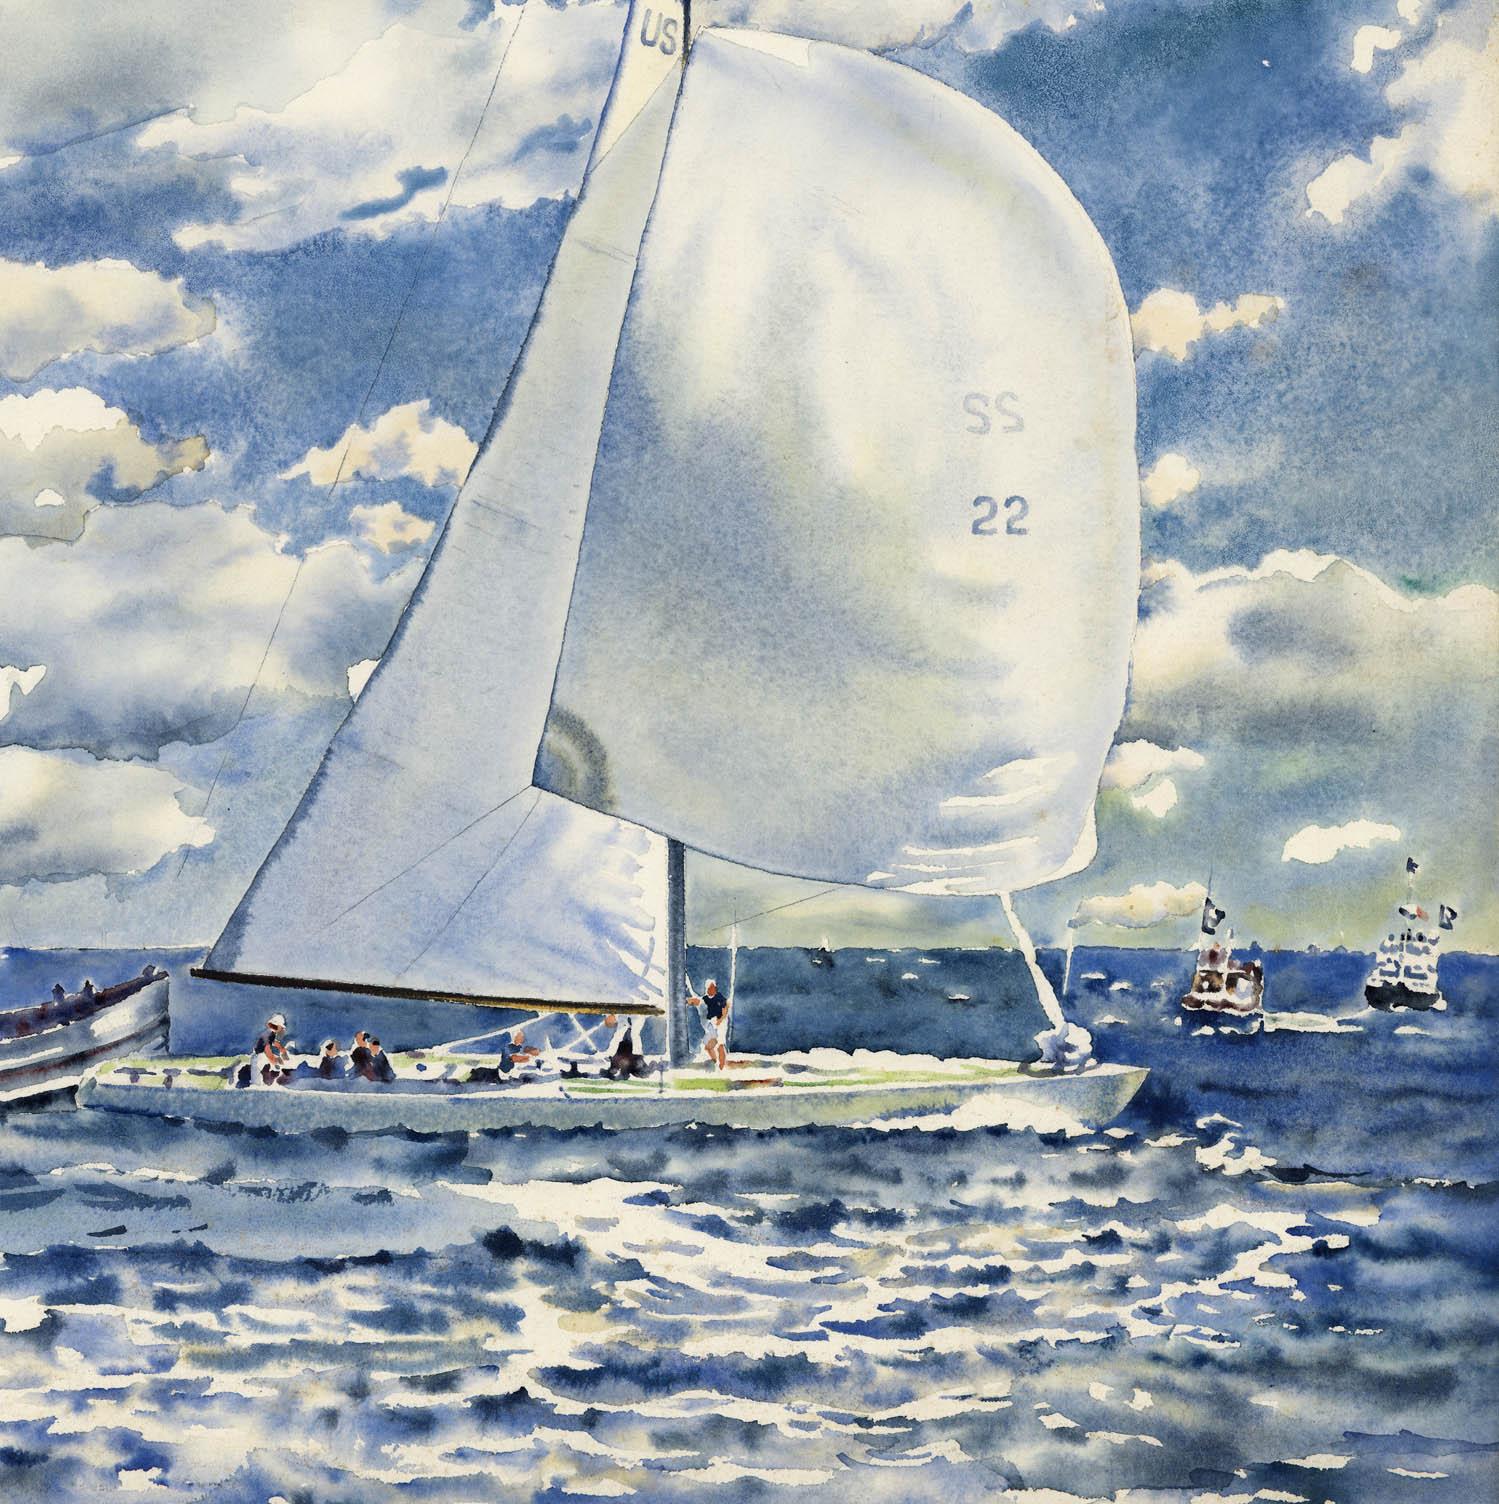 America's Cup - 1967.  Wing Mark, Intrepid and Dame Pattie. - Naturalistic Art by Joseph Webster Golinkin